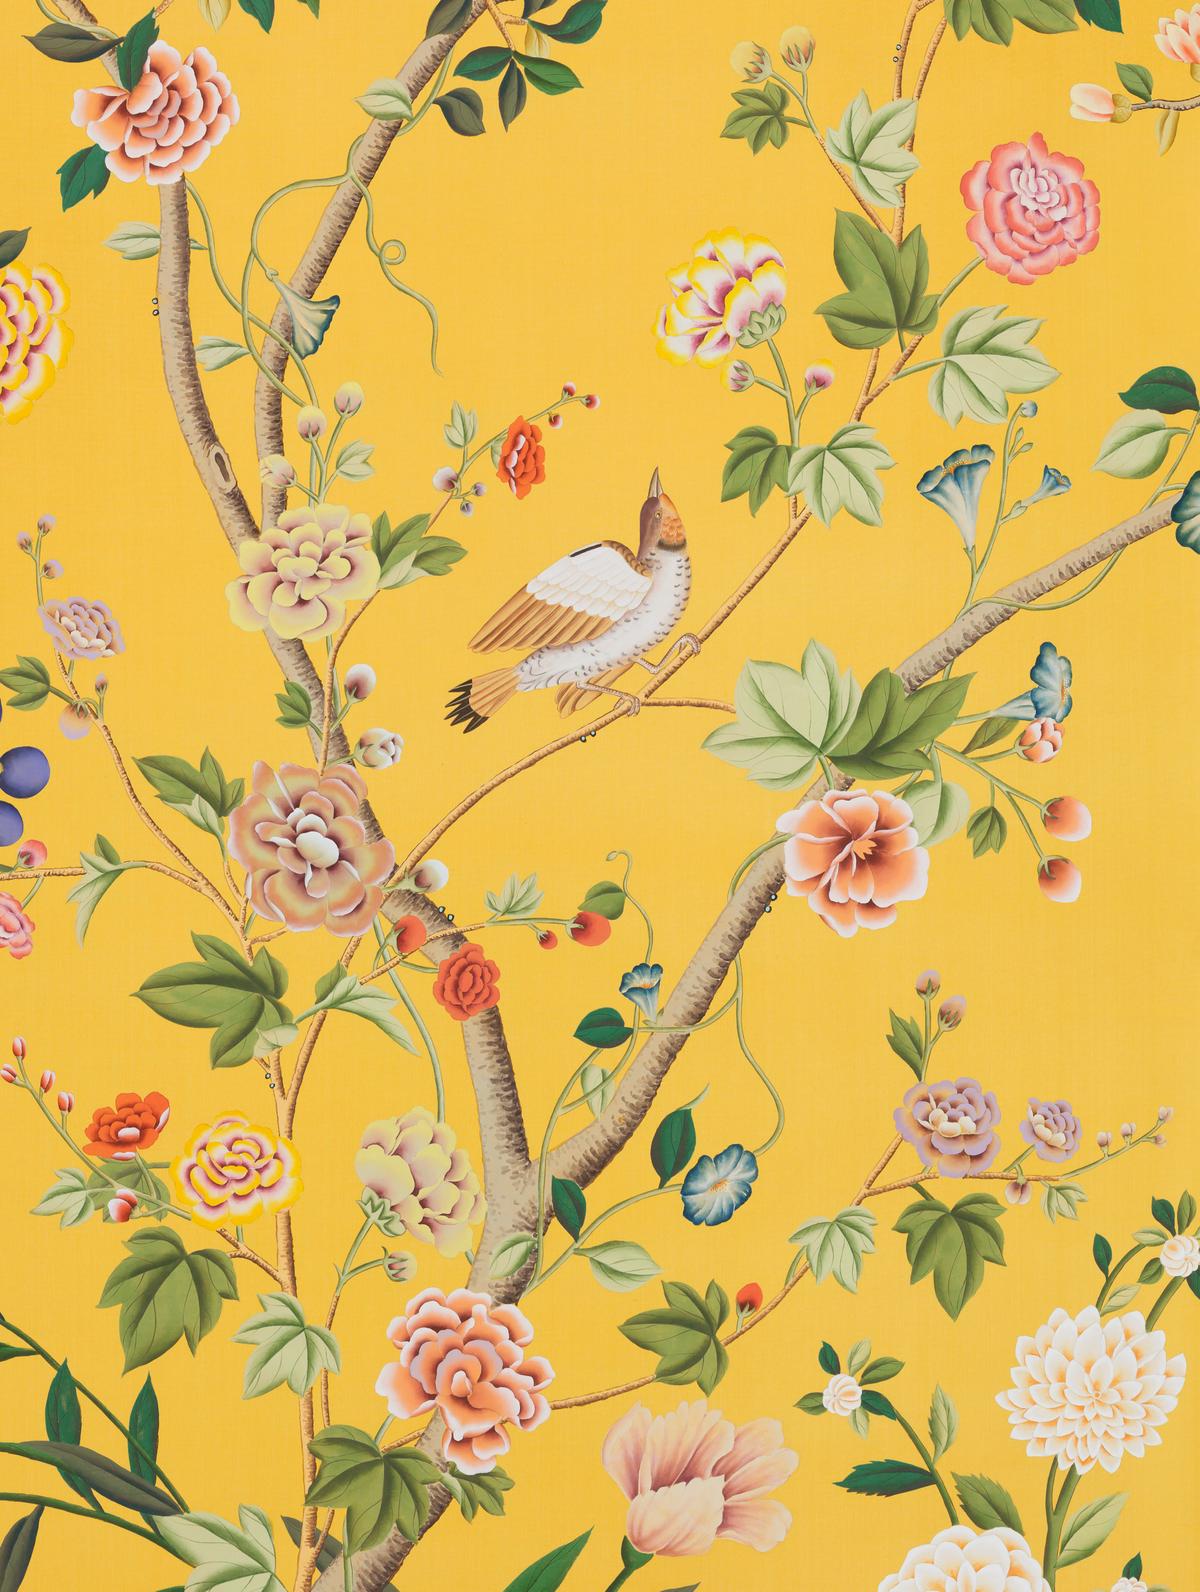 Detail of 'Erdem' on Golden Yellow Dyed Silk. (Courtesy of de Gournay)